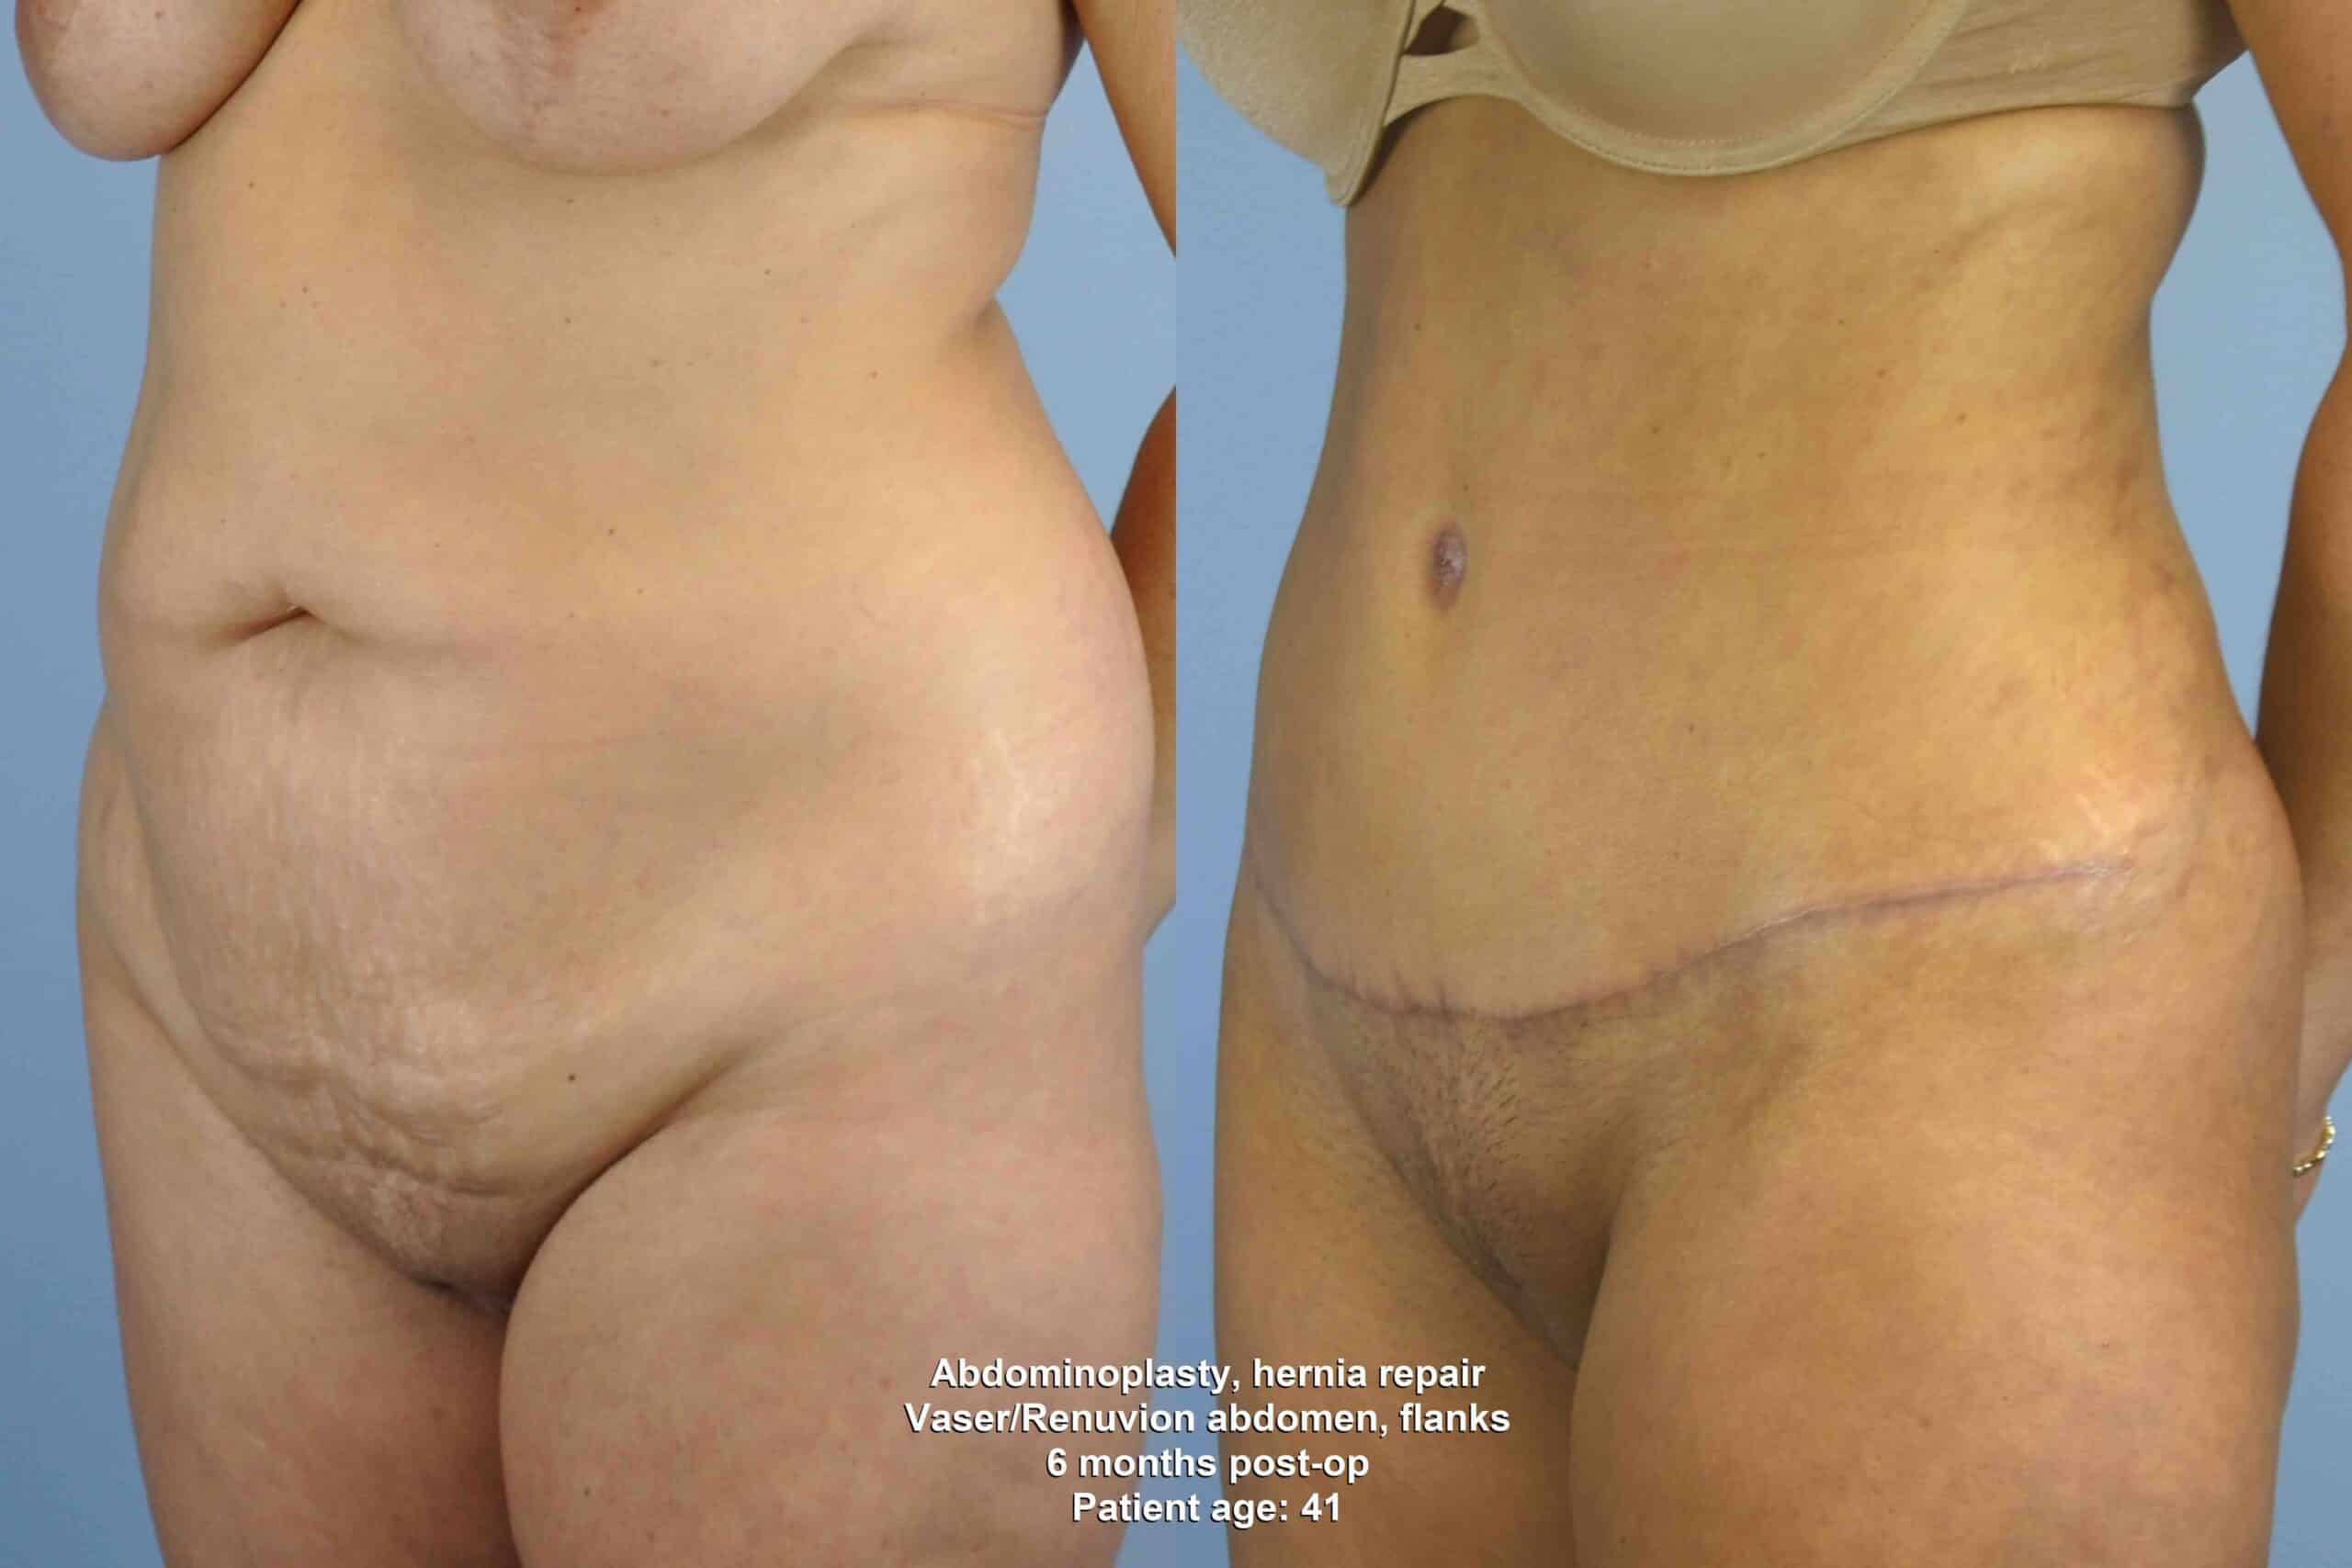 Before and after, patient 6 mo post op from Renuvion Abdomen and Flanks, VASER Abdomen and Flanks,Tummy Tuck with Hernia Repair procedures performed by Dr. Paul Vanek